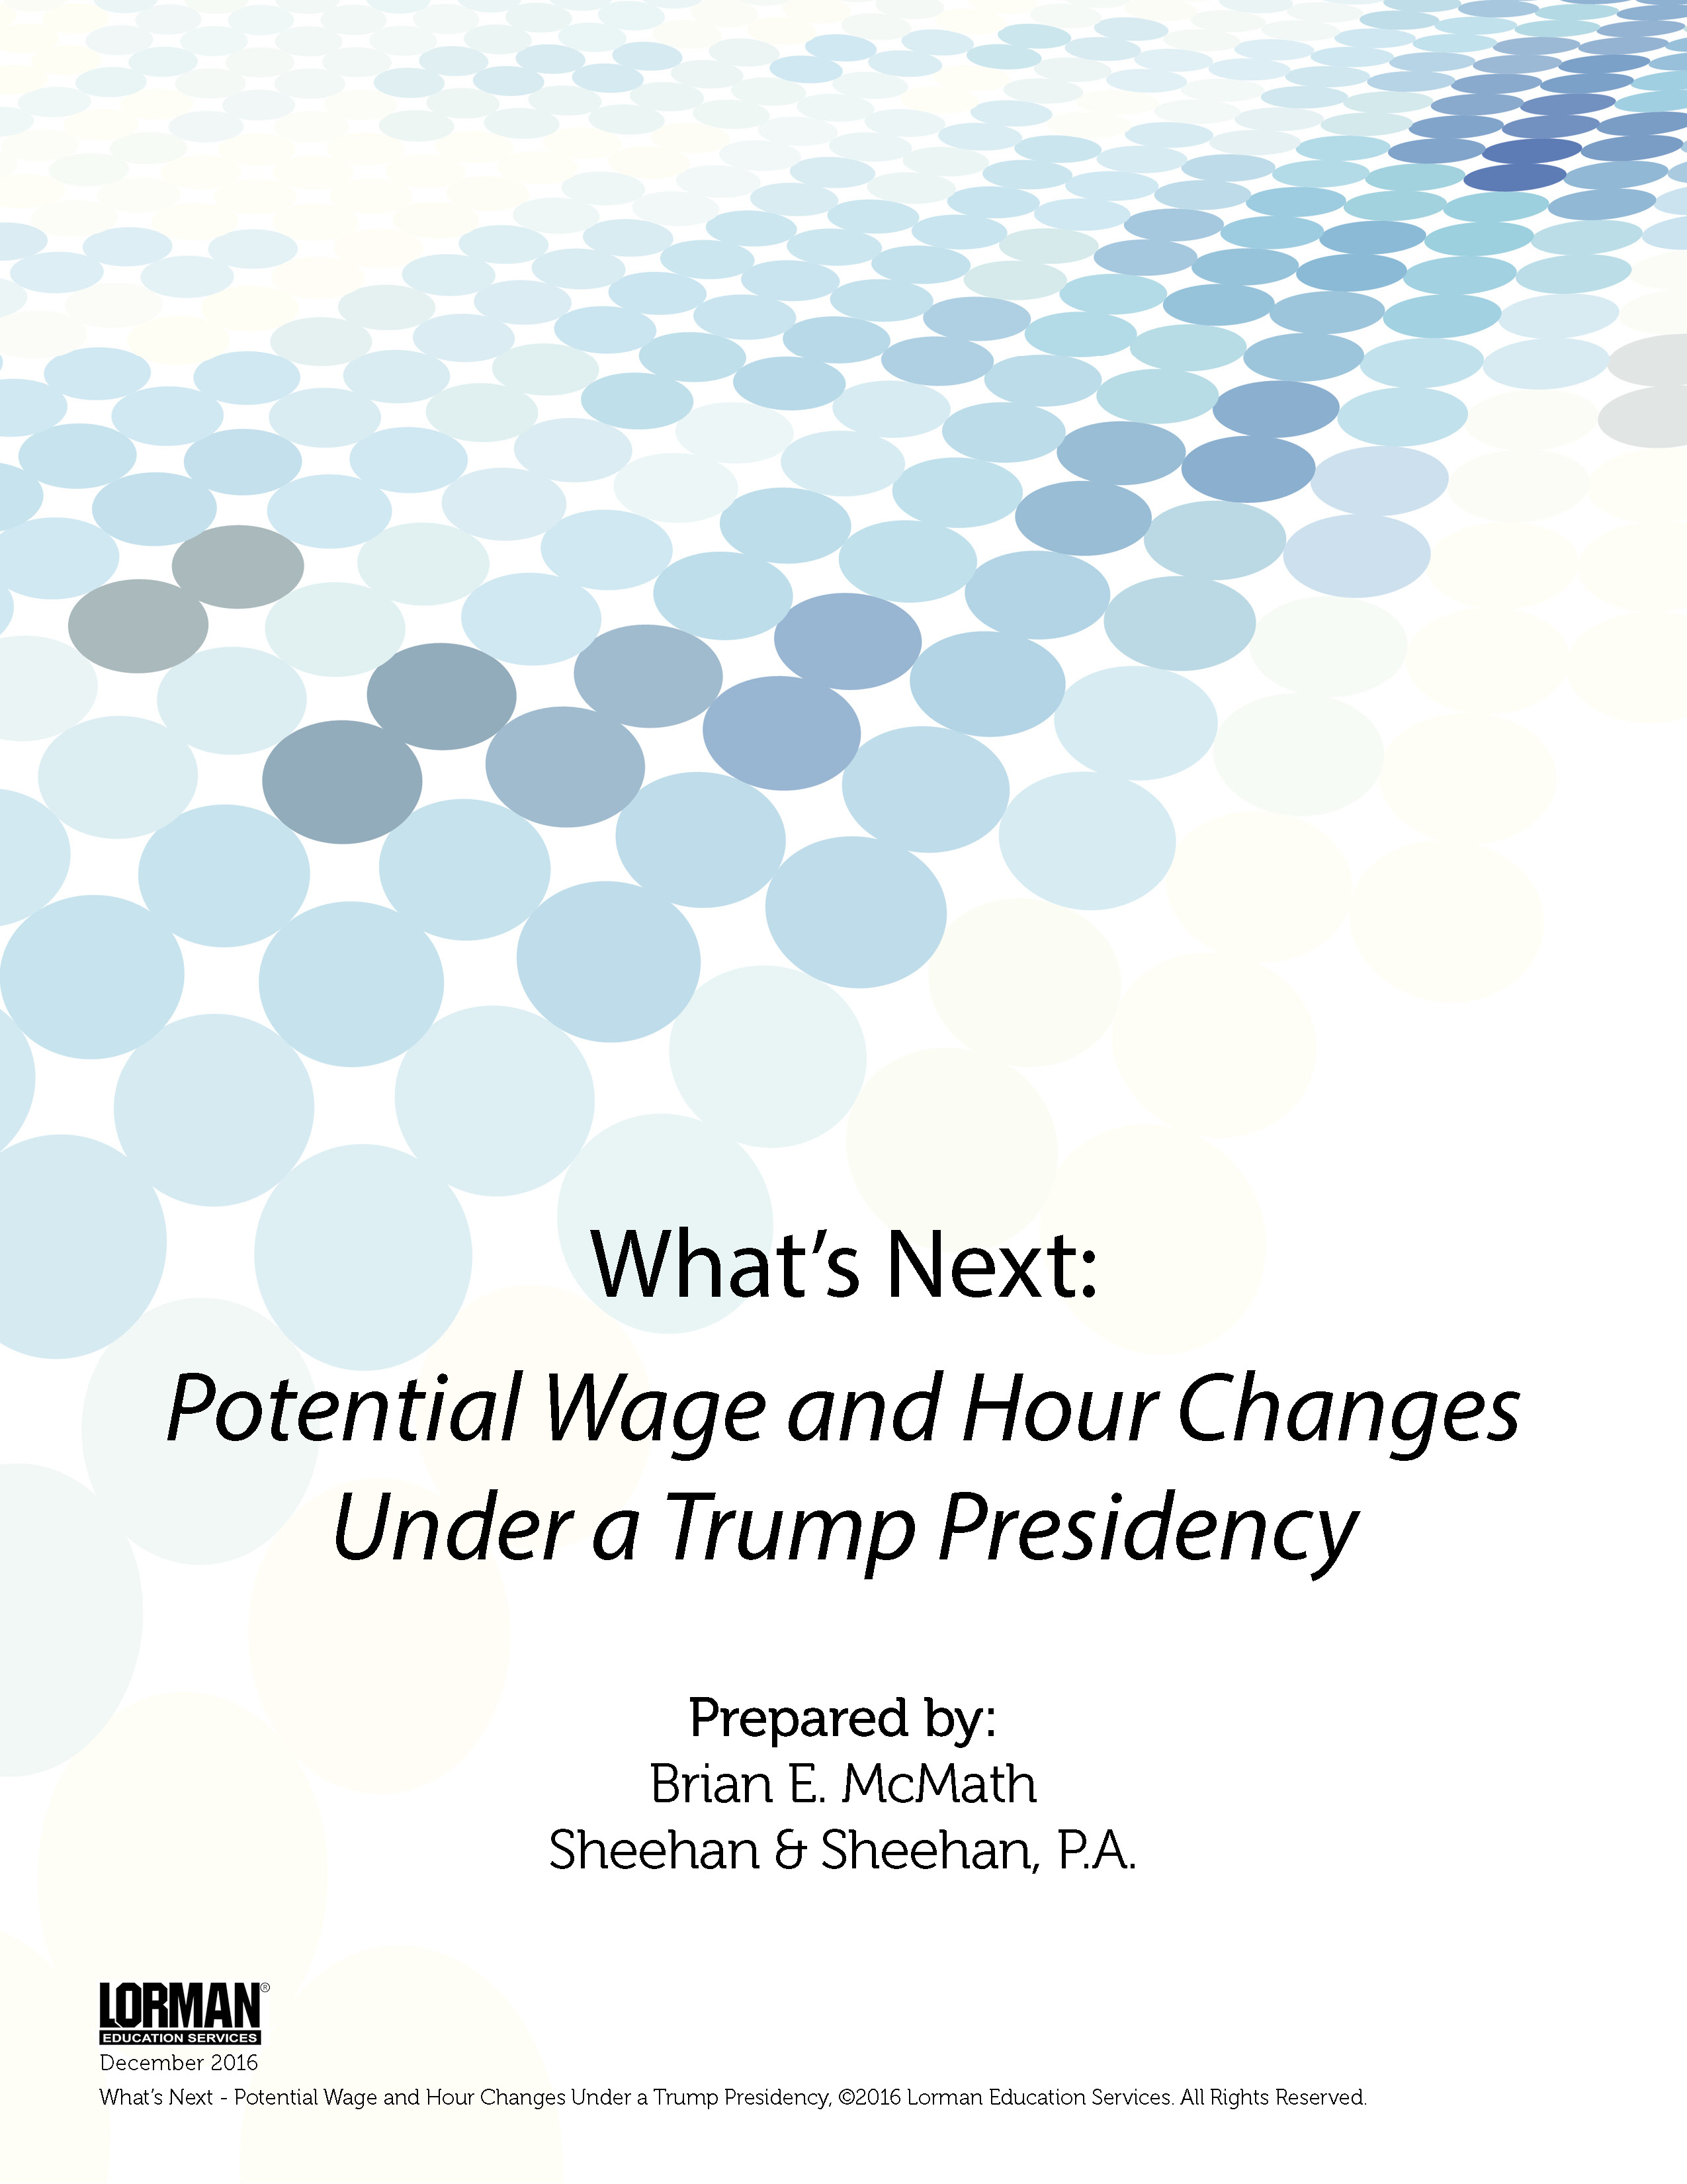 What’s Next - Potential Wage and Hour Changes Under a Trump Presidency